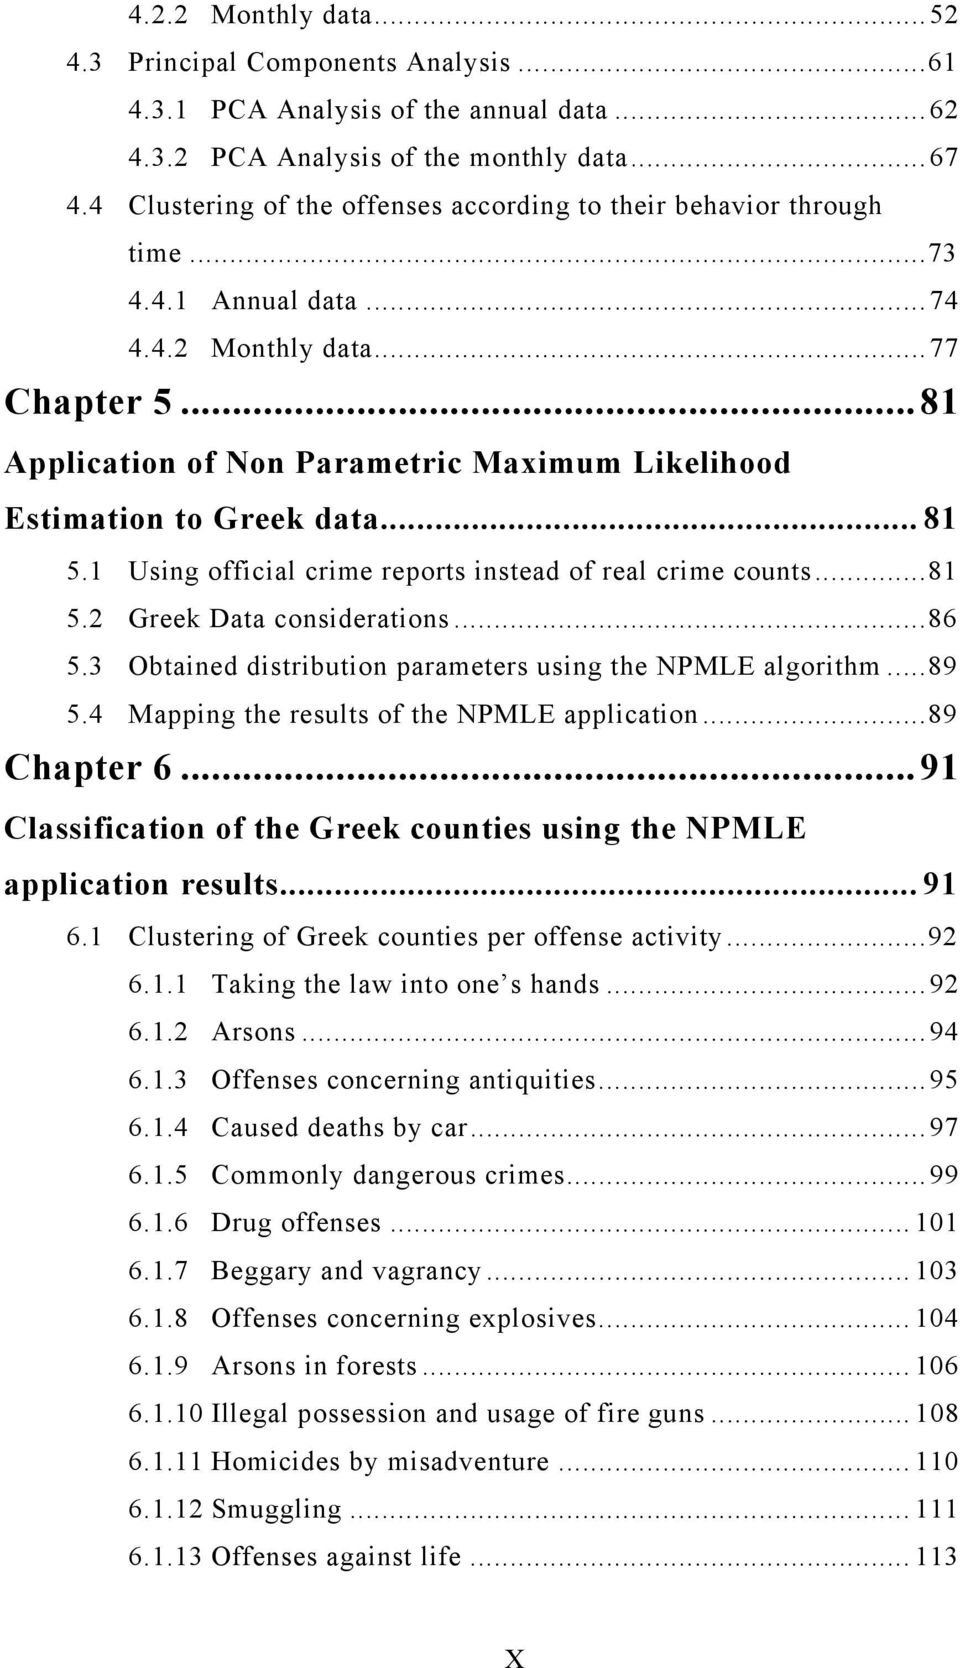 ..81 Application of Non Parametric Maximum Likelihood Estimation to Greek data... 81 5.1 Using official crime reports instead of real crime counts...81 5.2 Greek Data considerations...86 5.